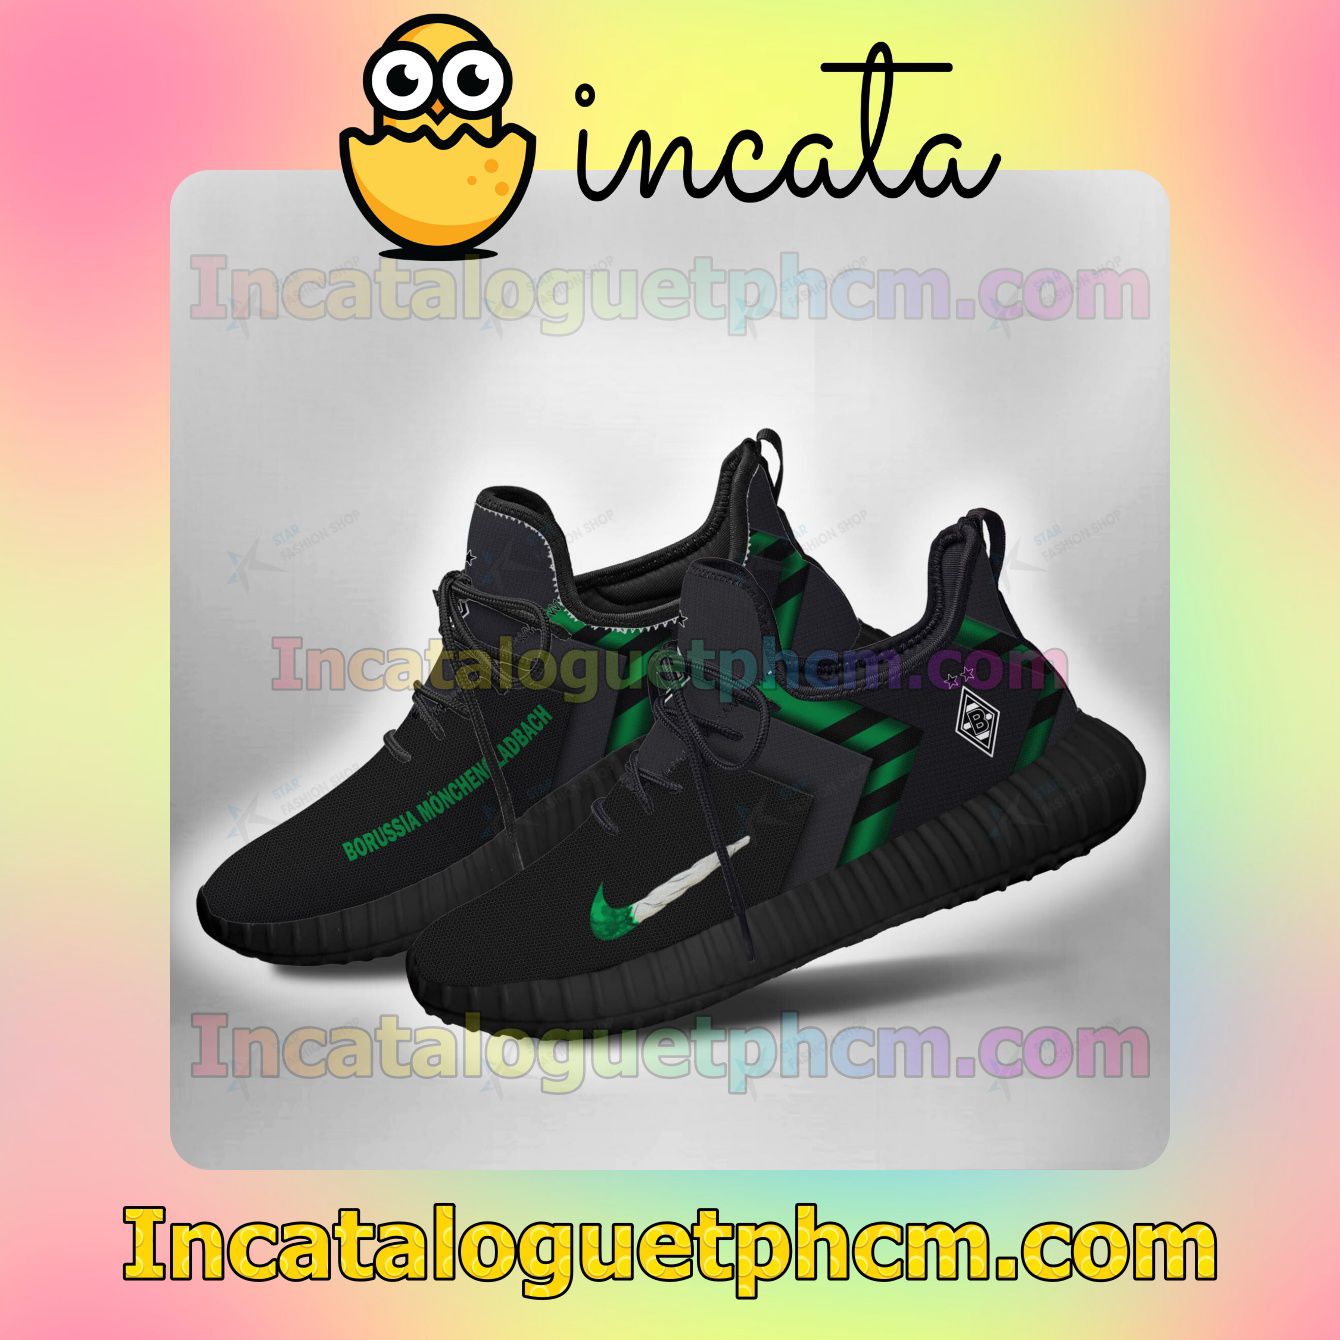 Absolutely Love Borussia Monchengladbach Ultraboost Yeezy Shoes Sneakers